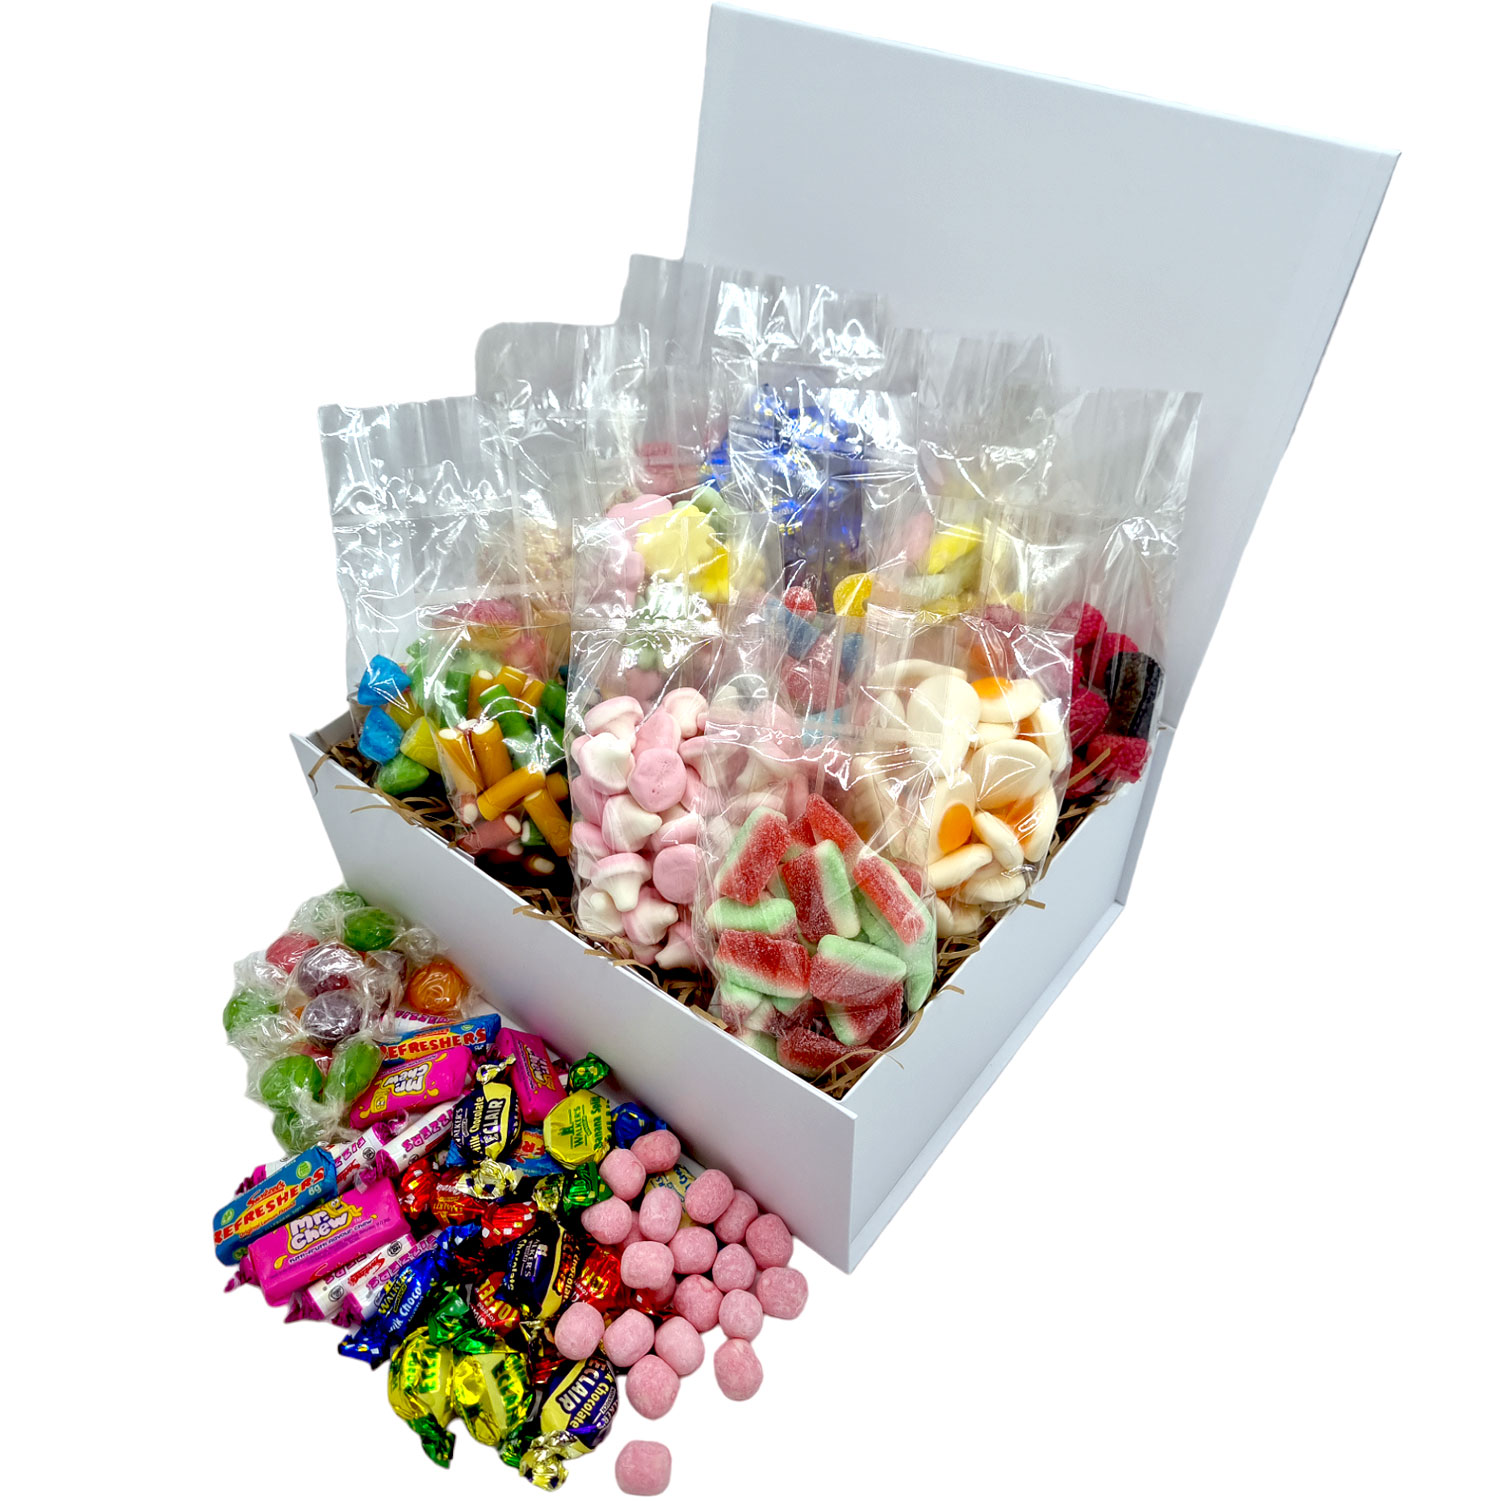 Chocolate Pick and Mix Sweets Gift Box 800g